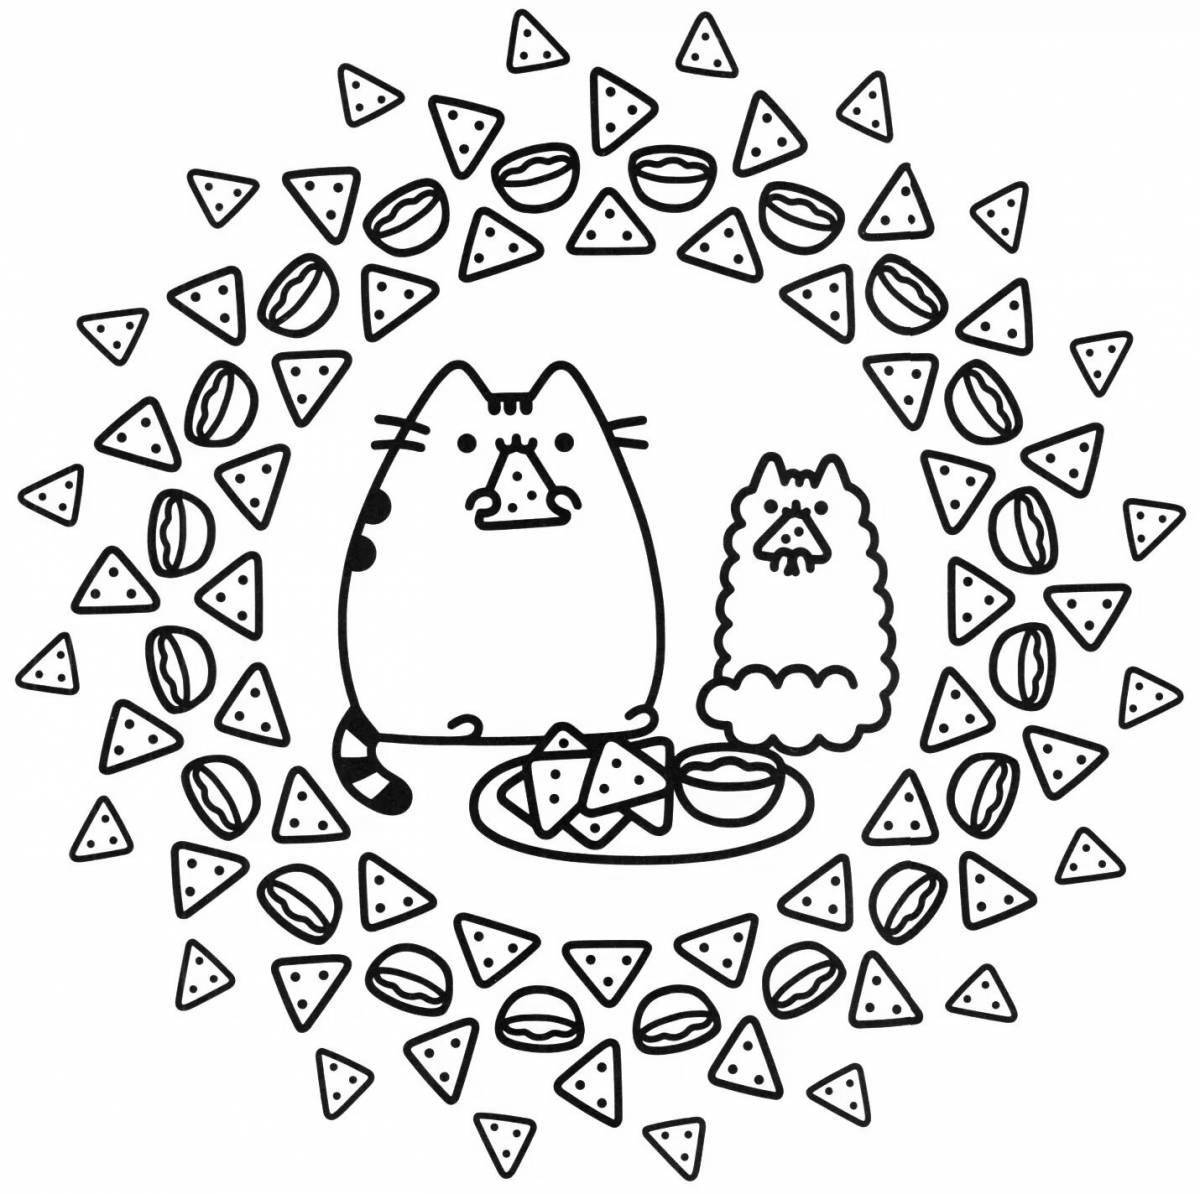 Pushin's playful coloring page